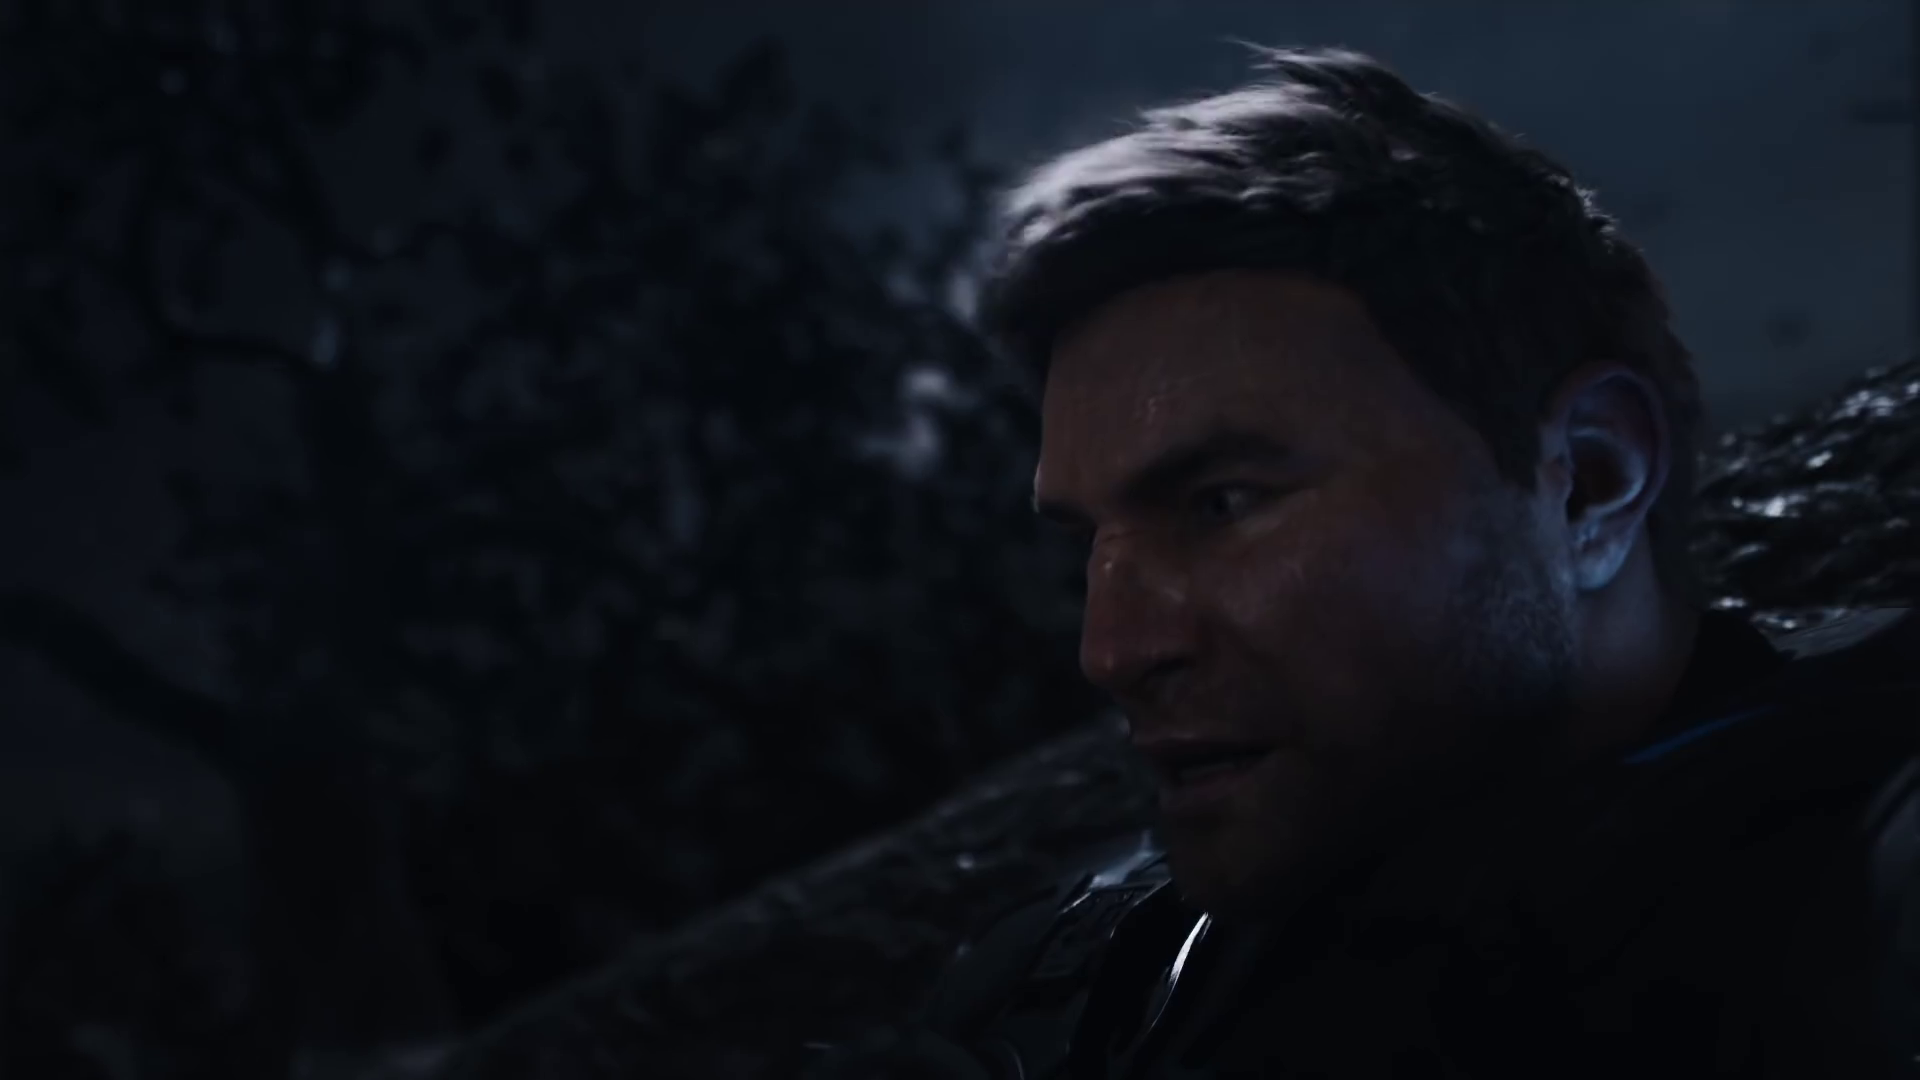 Gears of War 4 trailer brings nostalgia, excitement to fans - AfterDawn